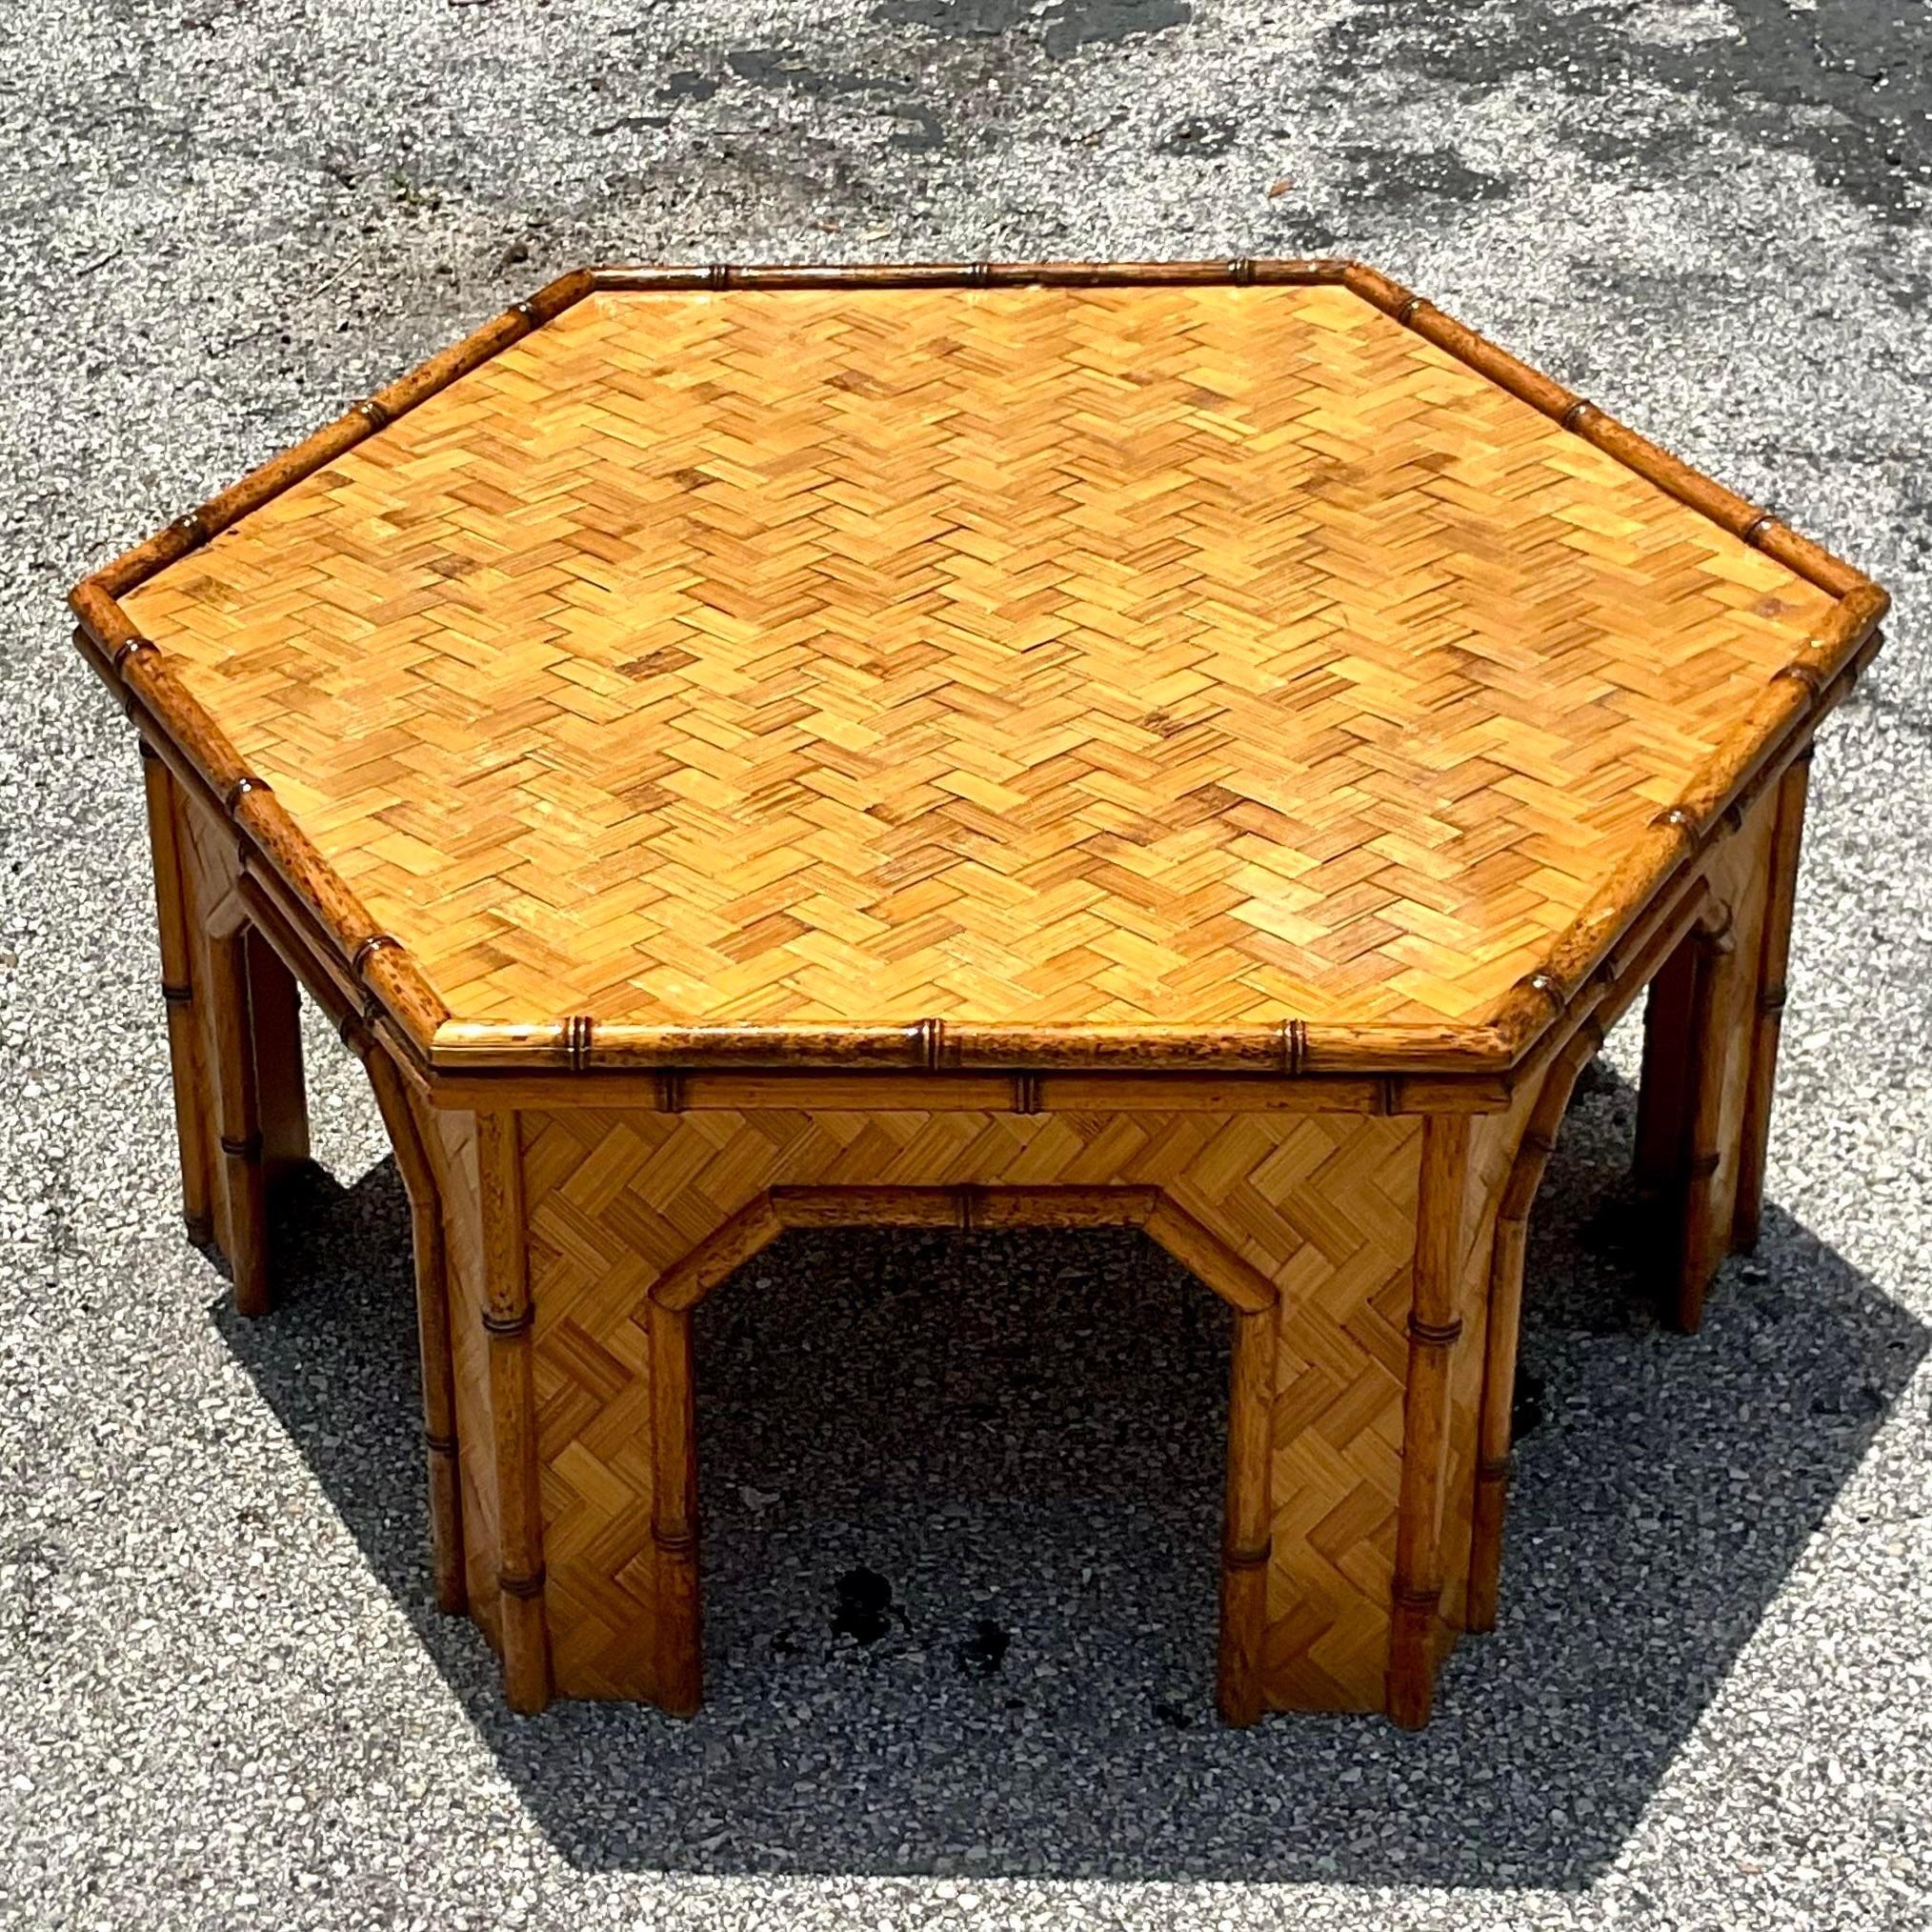 A fabulous vintage Coastal coffee table. A chic Hexagon shape with parquet rattan. Beautiful bamboo trim completes the look. Acquired from a Palm Beach estate. 